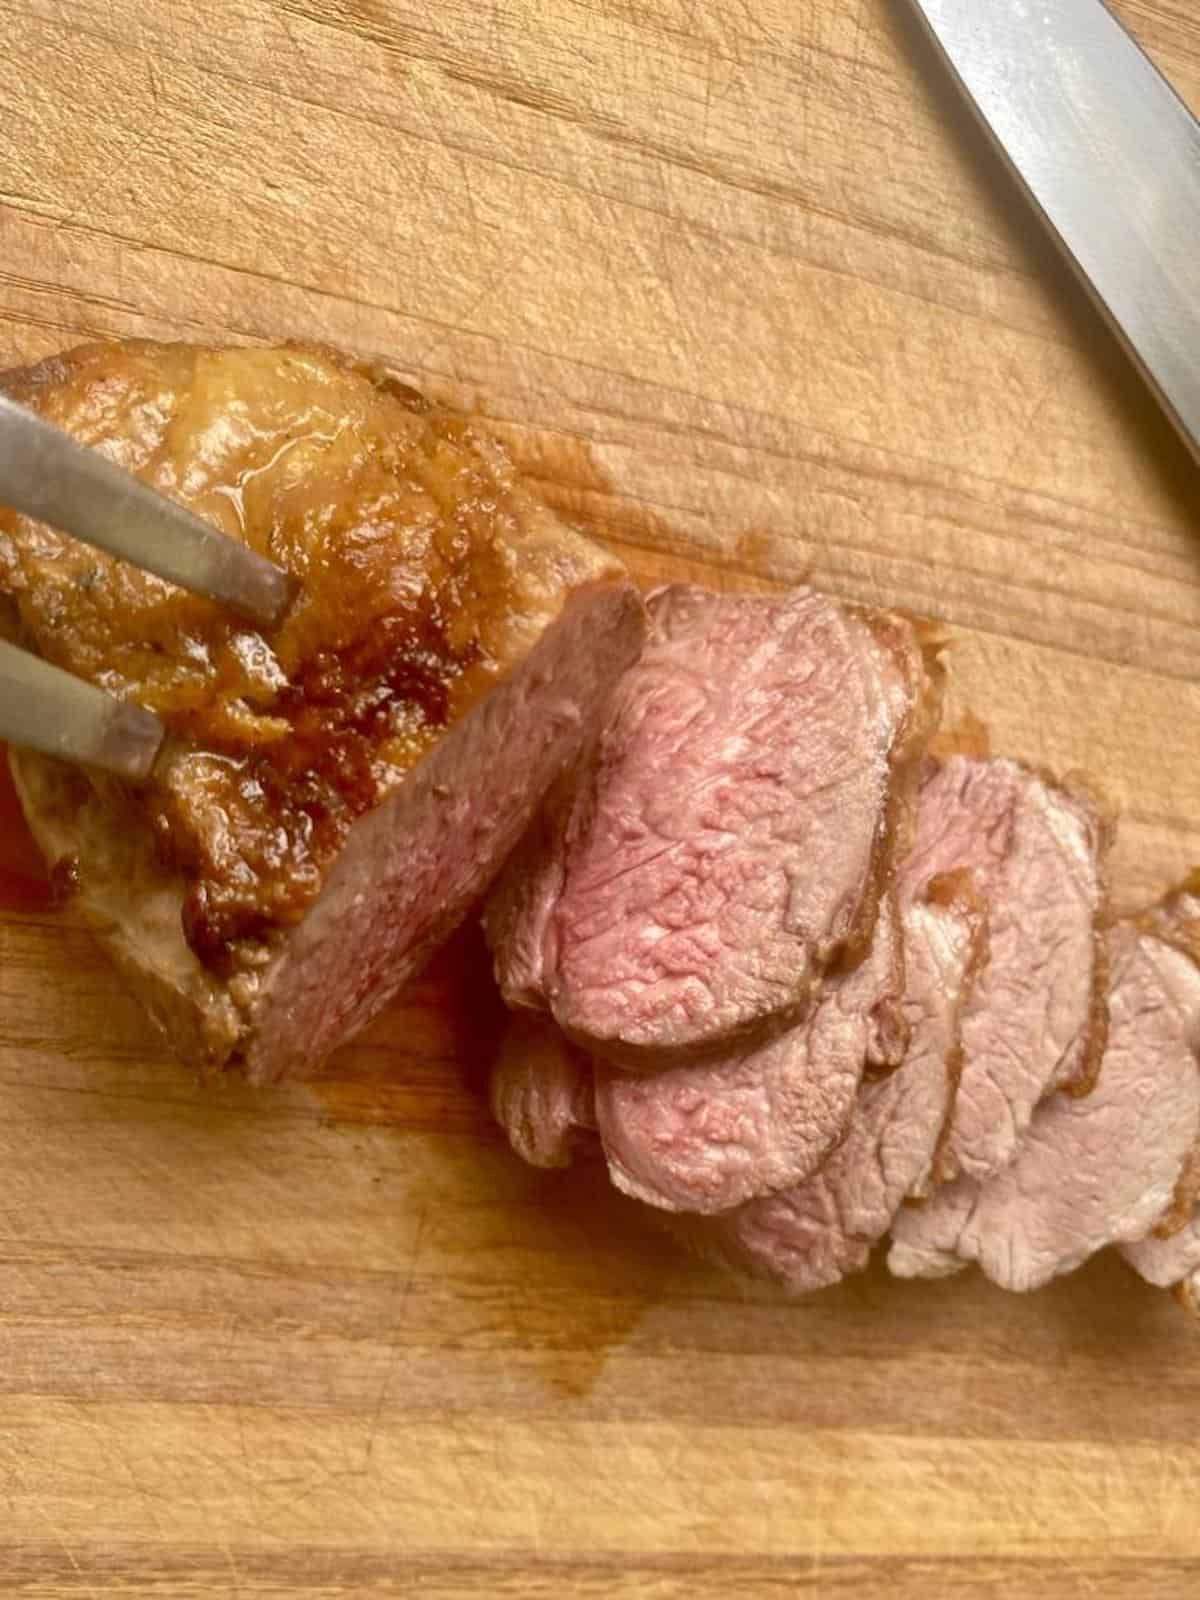 Carved lamb rump roast on a wooden carving board